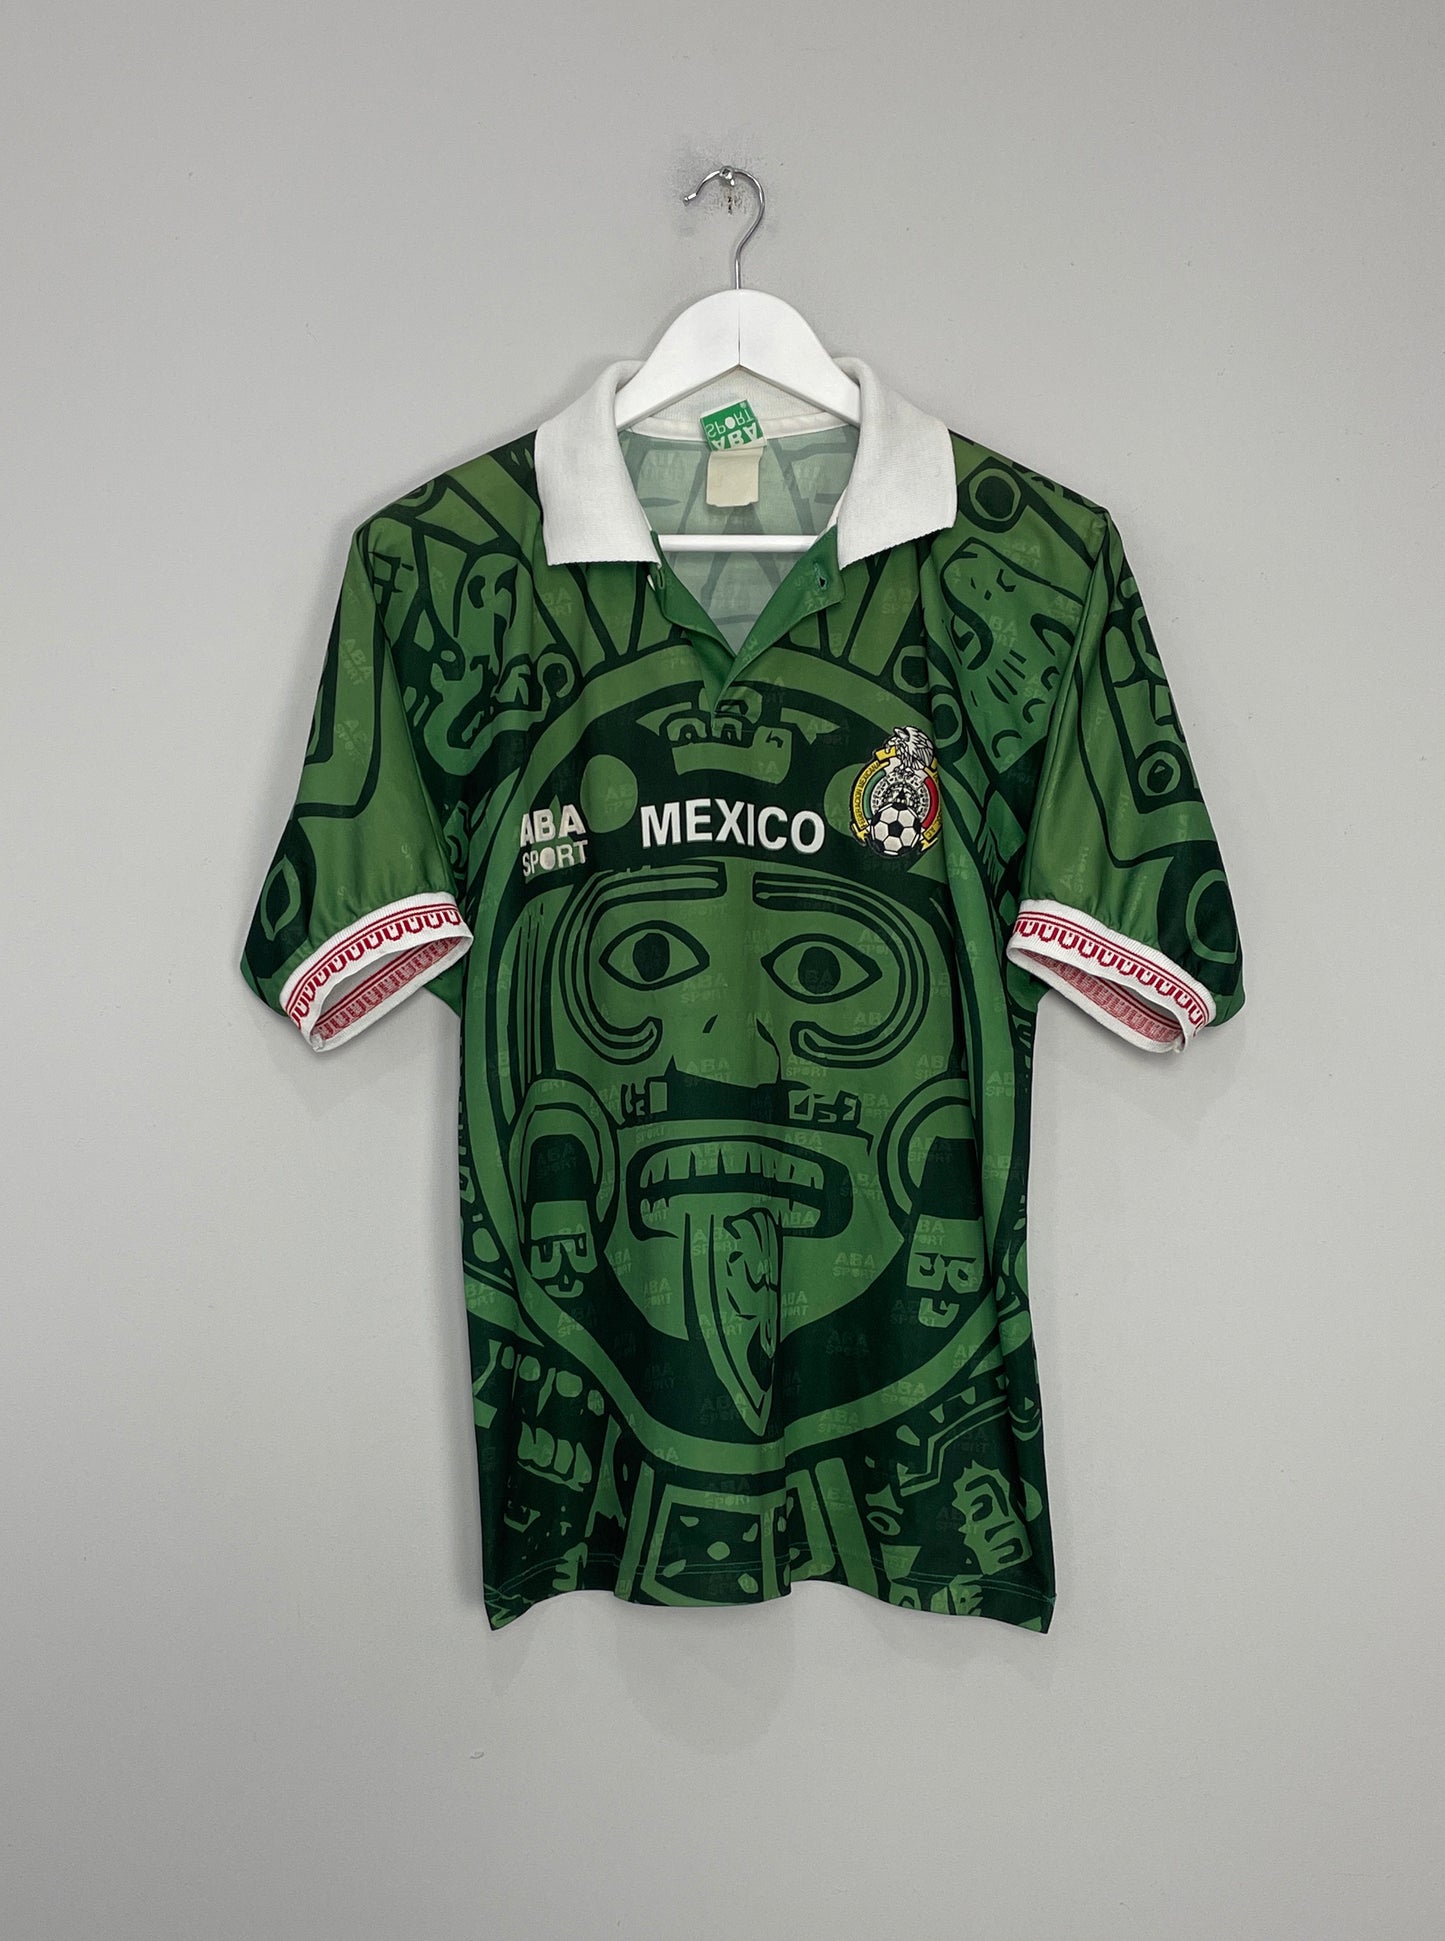 Image of the Mexico shirt from the 1998/99 season